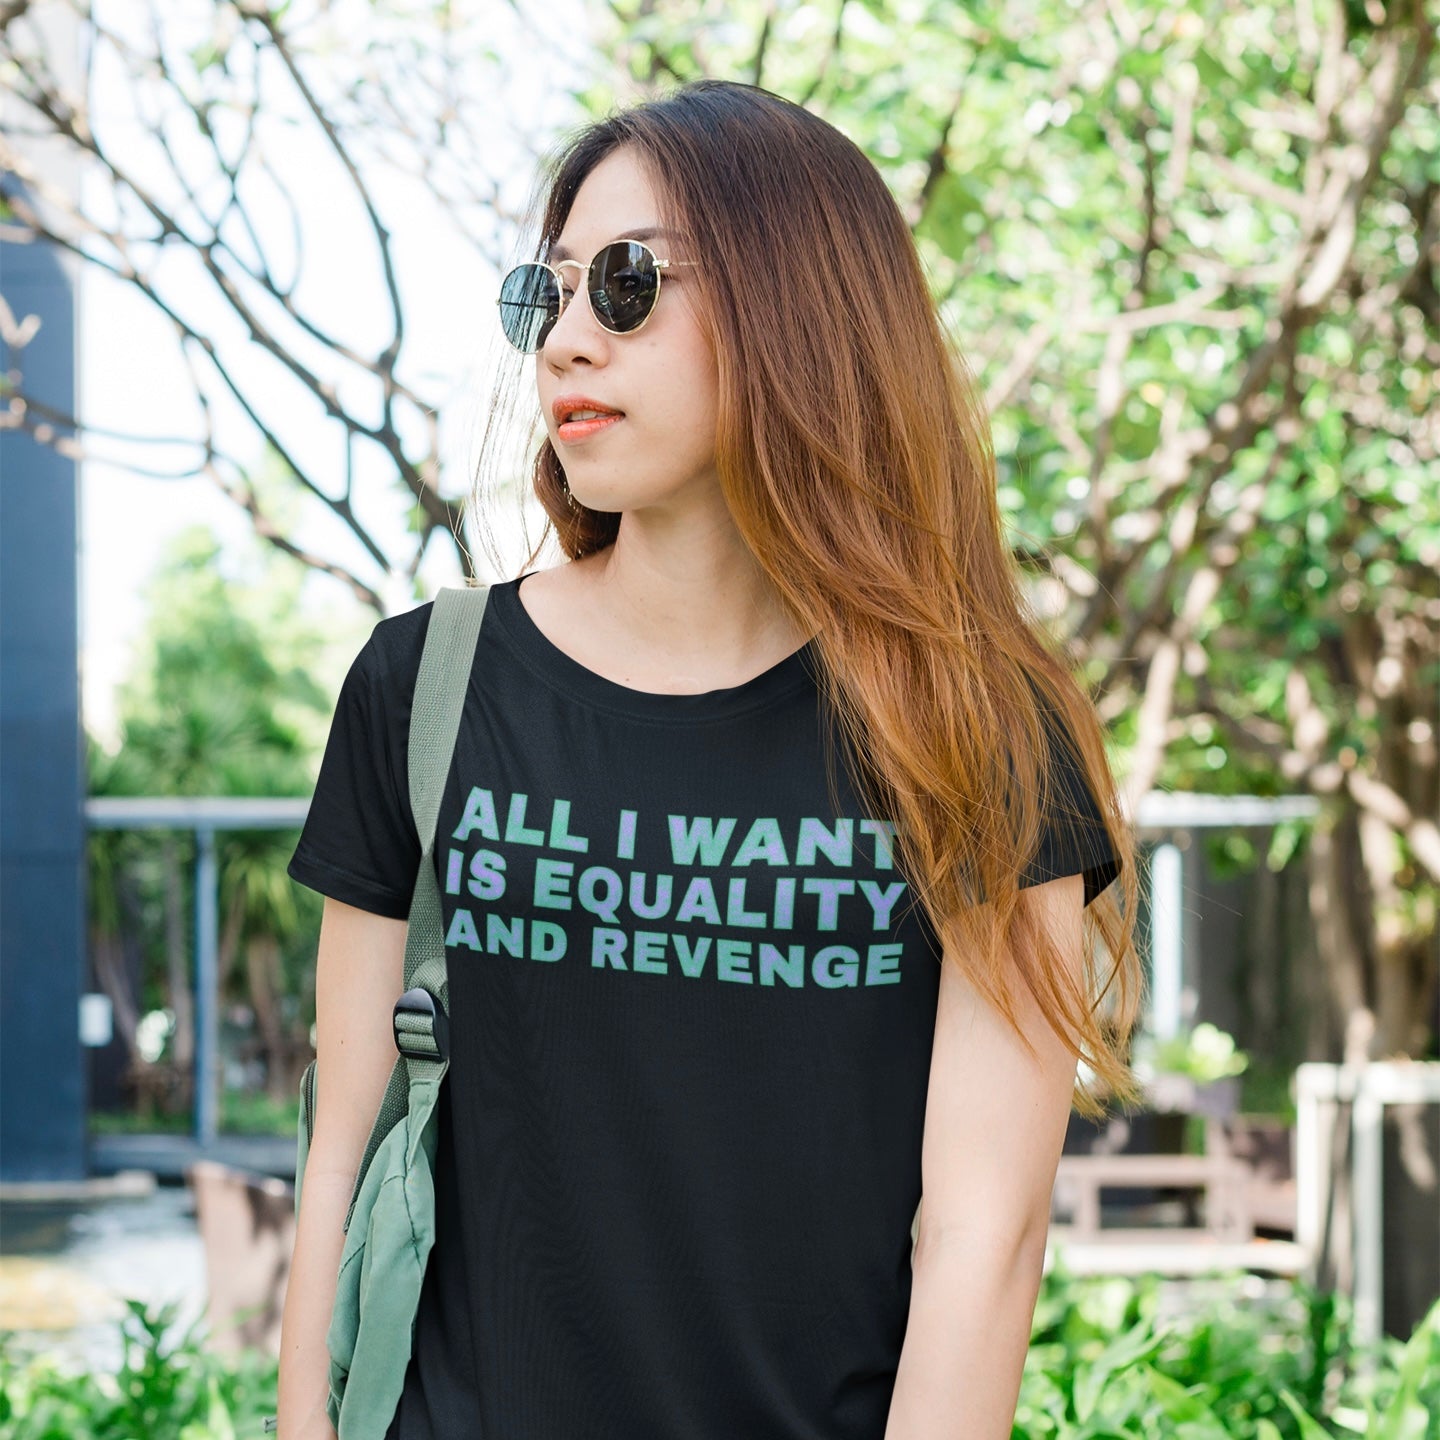 Black feminist t-shirt with the text 'All I Want is Equality and Revenge,' a women’s rights shirt advocating for justice, perfect for feminist t-shirts for a cause